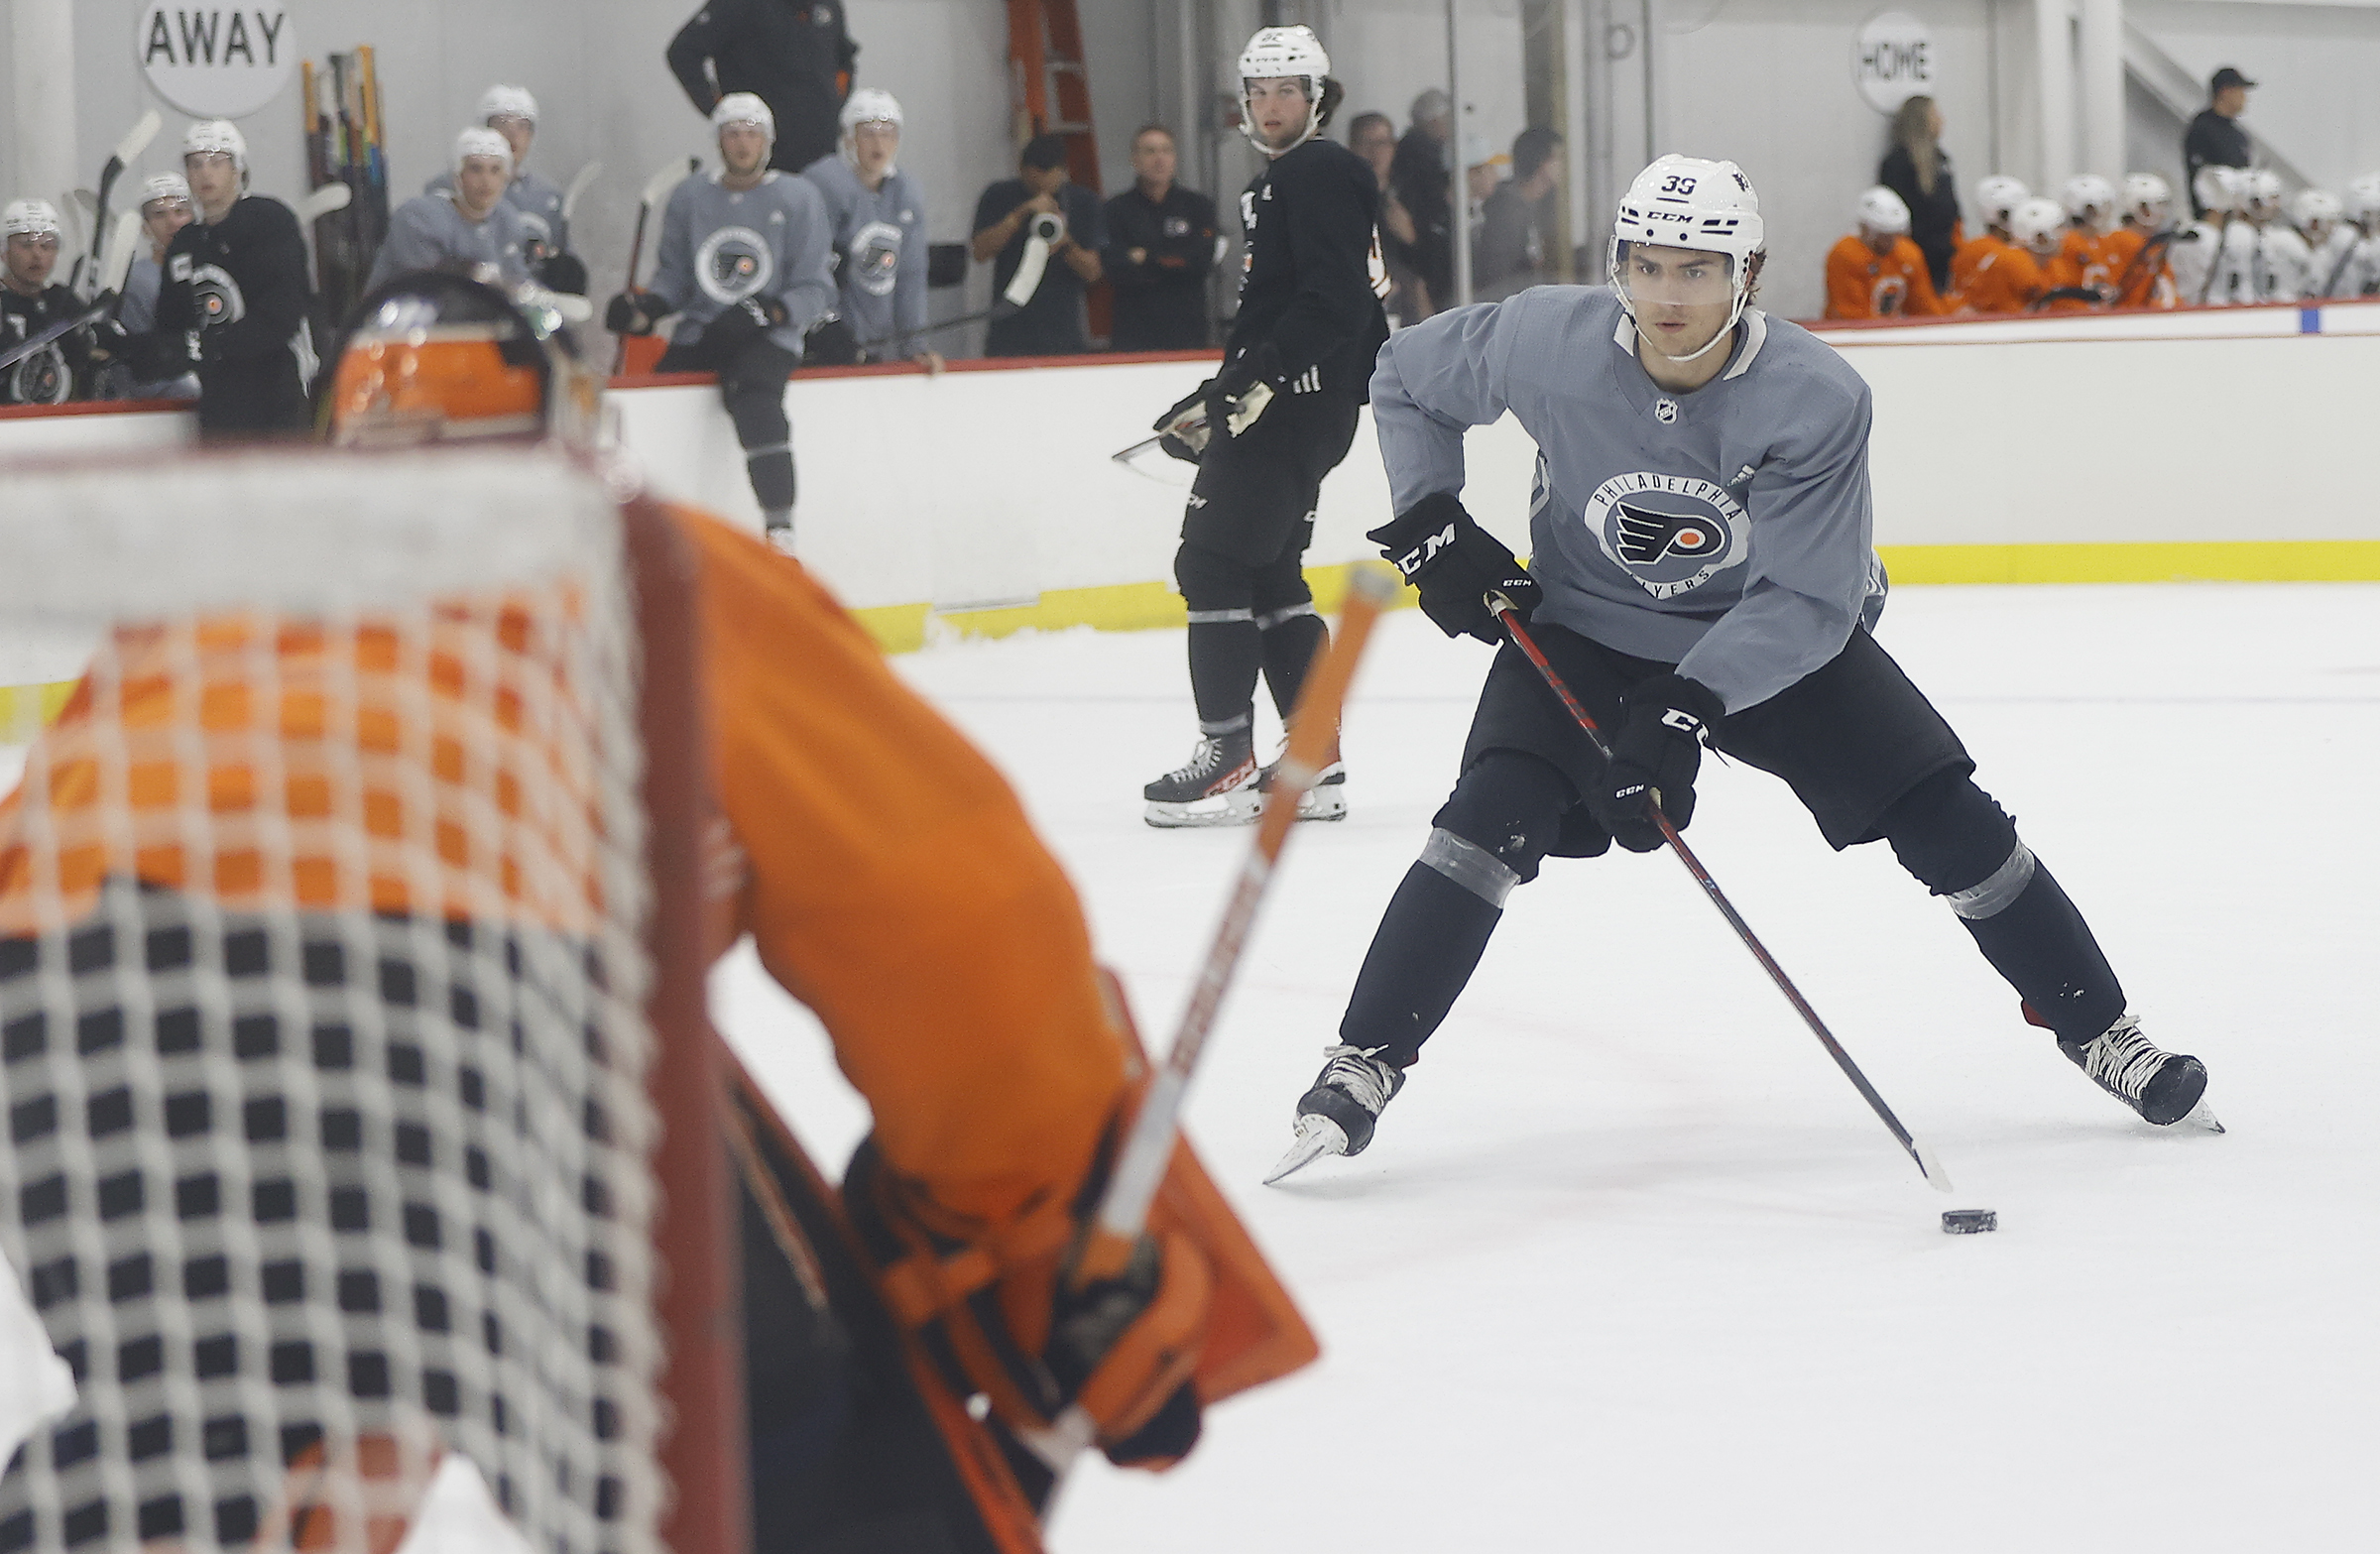 Flyers prospect Emil Andrae has been compared to Blues star Torey Krug